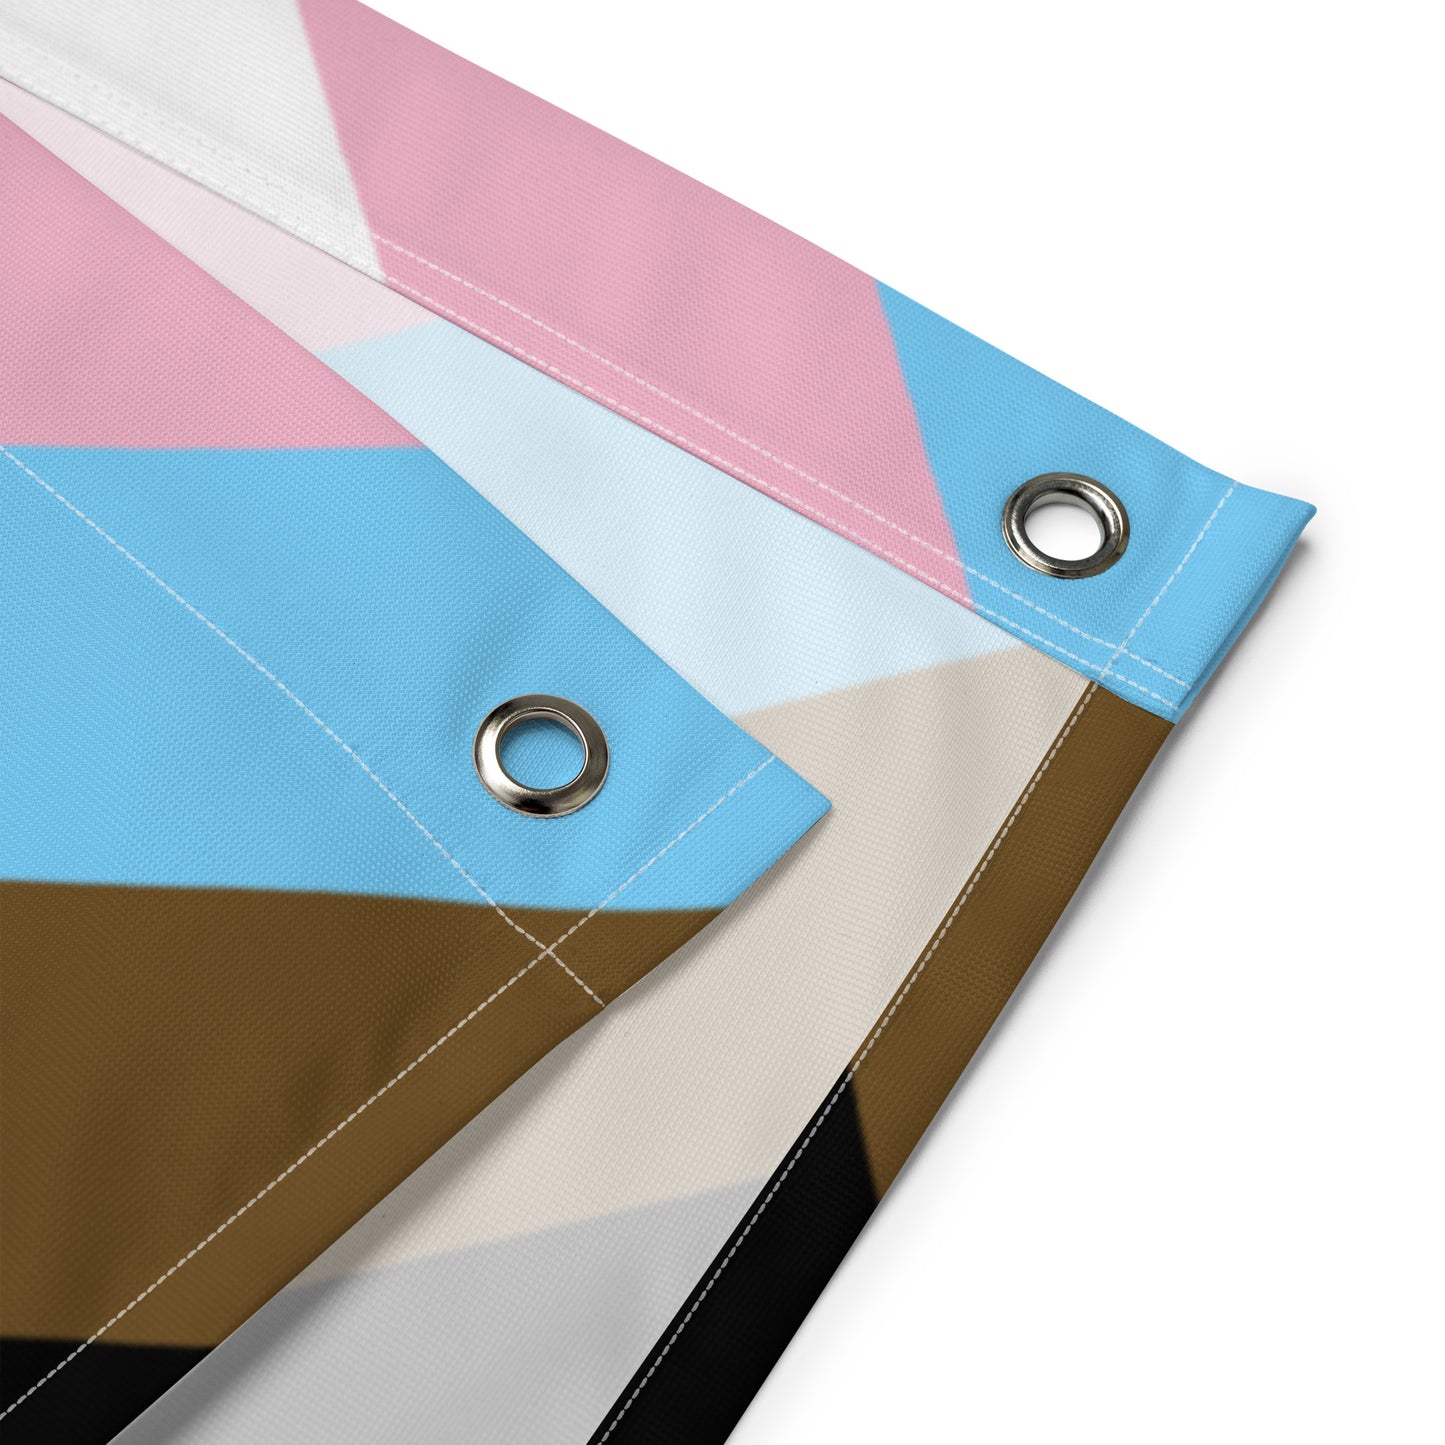 a close-up of the grommets at the corners of the progress pride blackbeard pirate flag